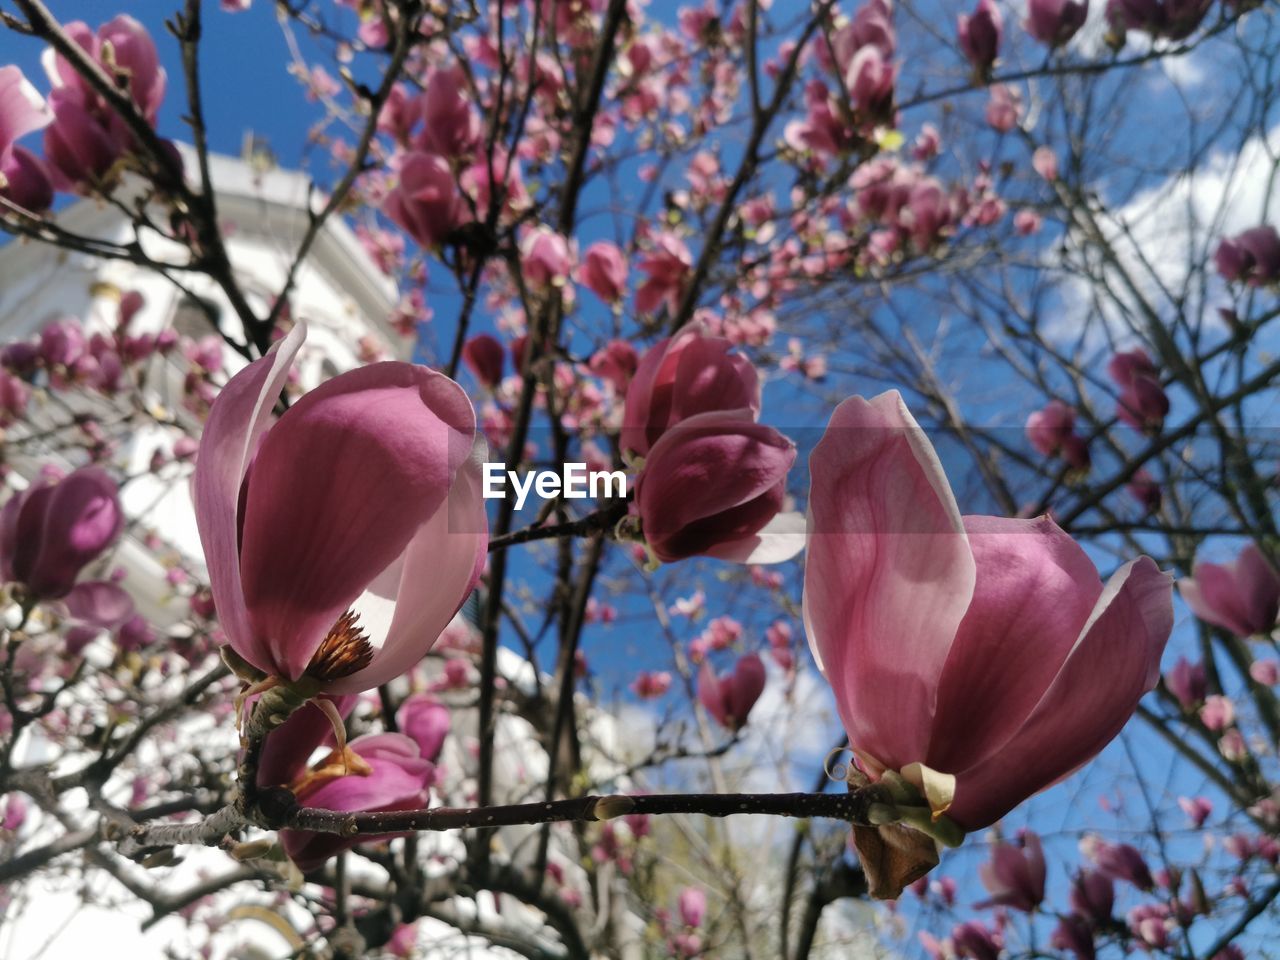 plant, flower, flowering plant, beauty in nature, freshness, fragility, pink, tree, growth, magnolia, branch, blossom, springtime, spring, nature, low angle view, petal, close-up, no people, focus on foreground, day, sky, twig, inflorescence, outdoors, cherry blossom, flower head, botany, cherry tree